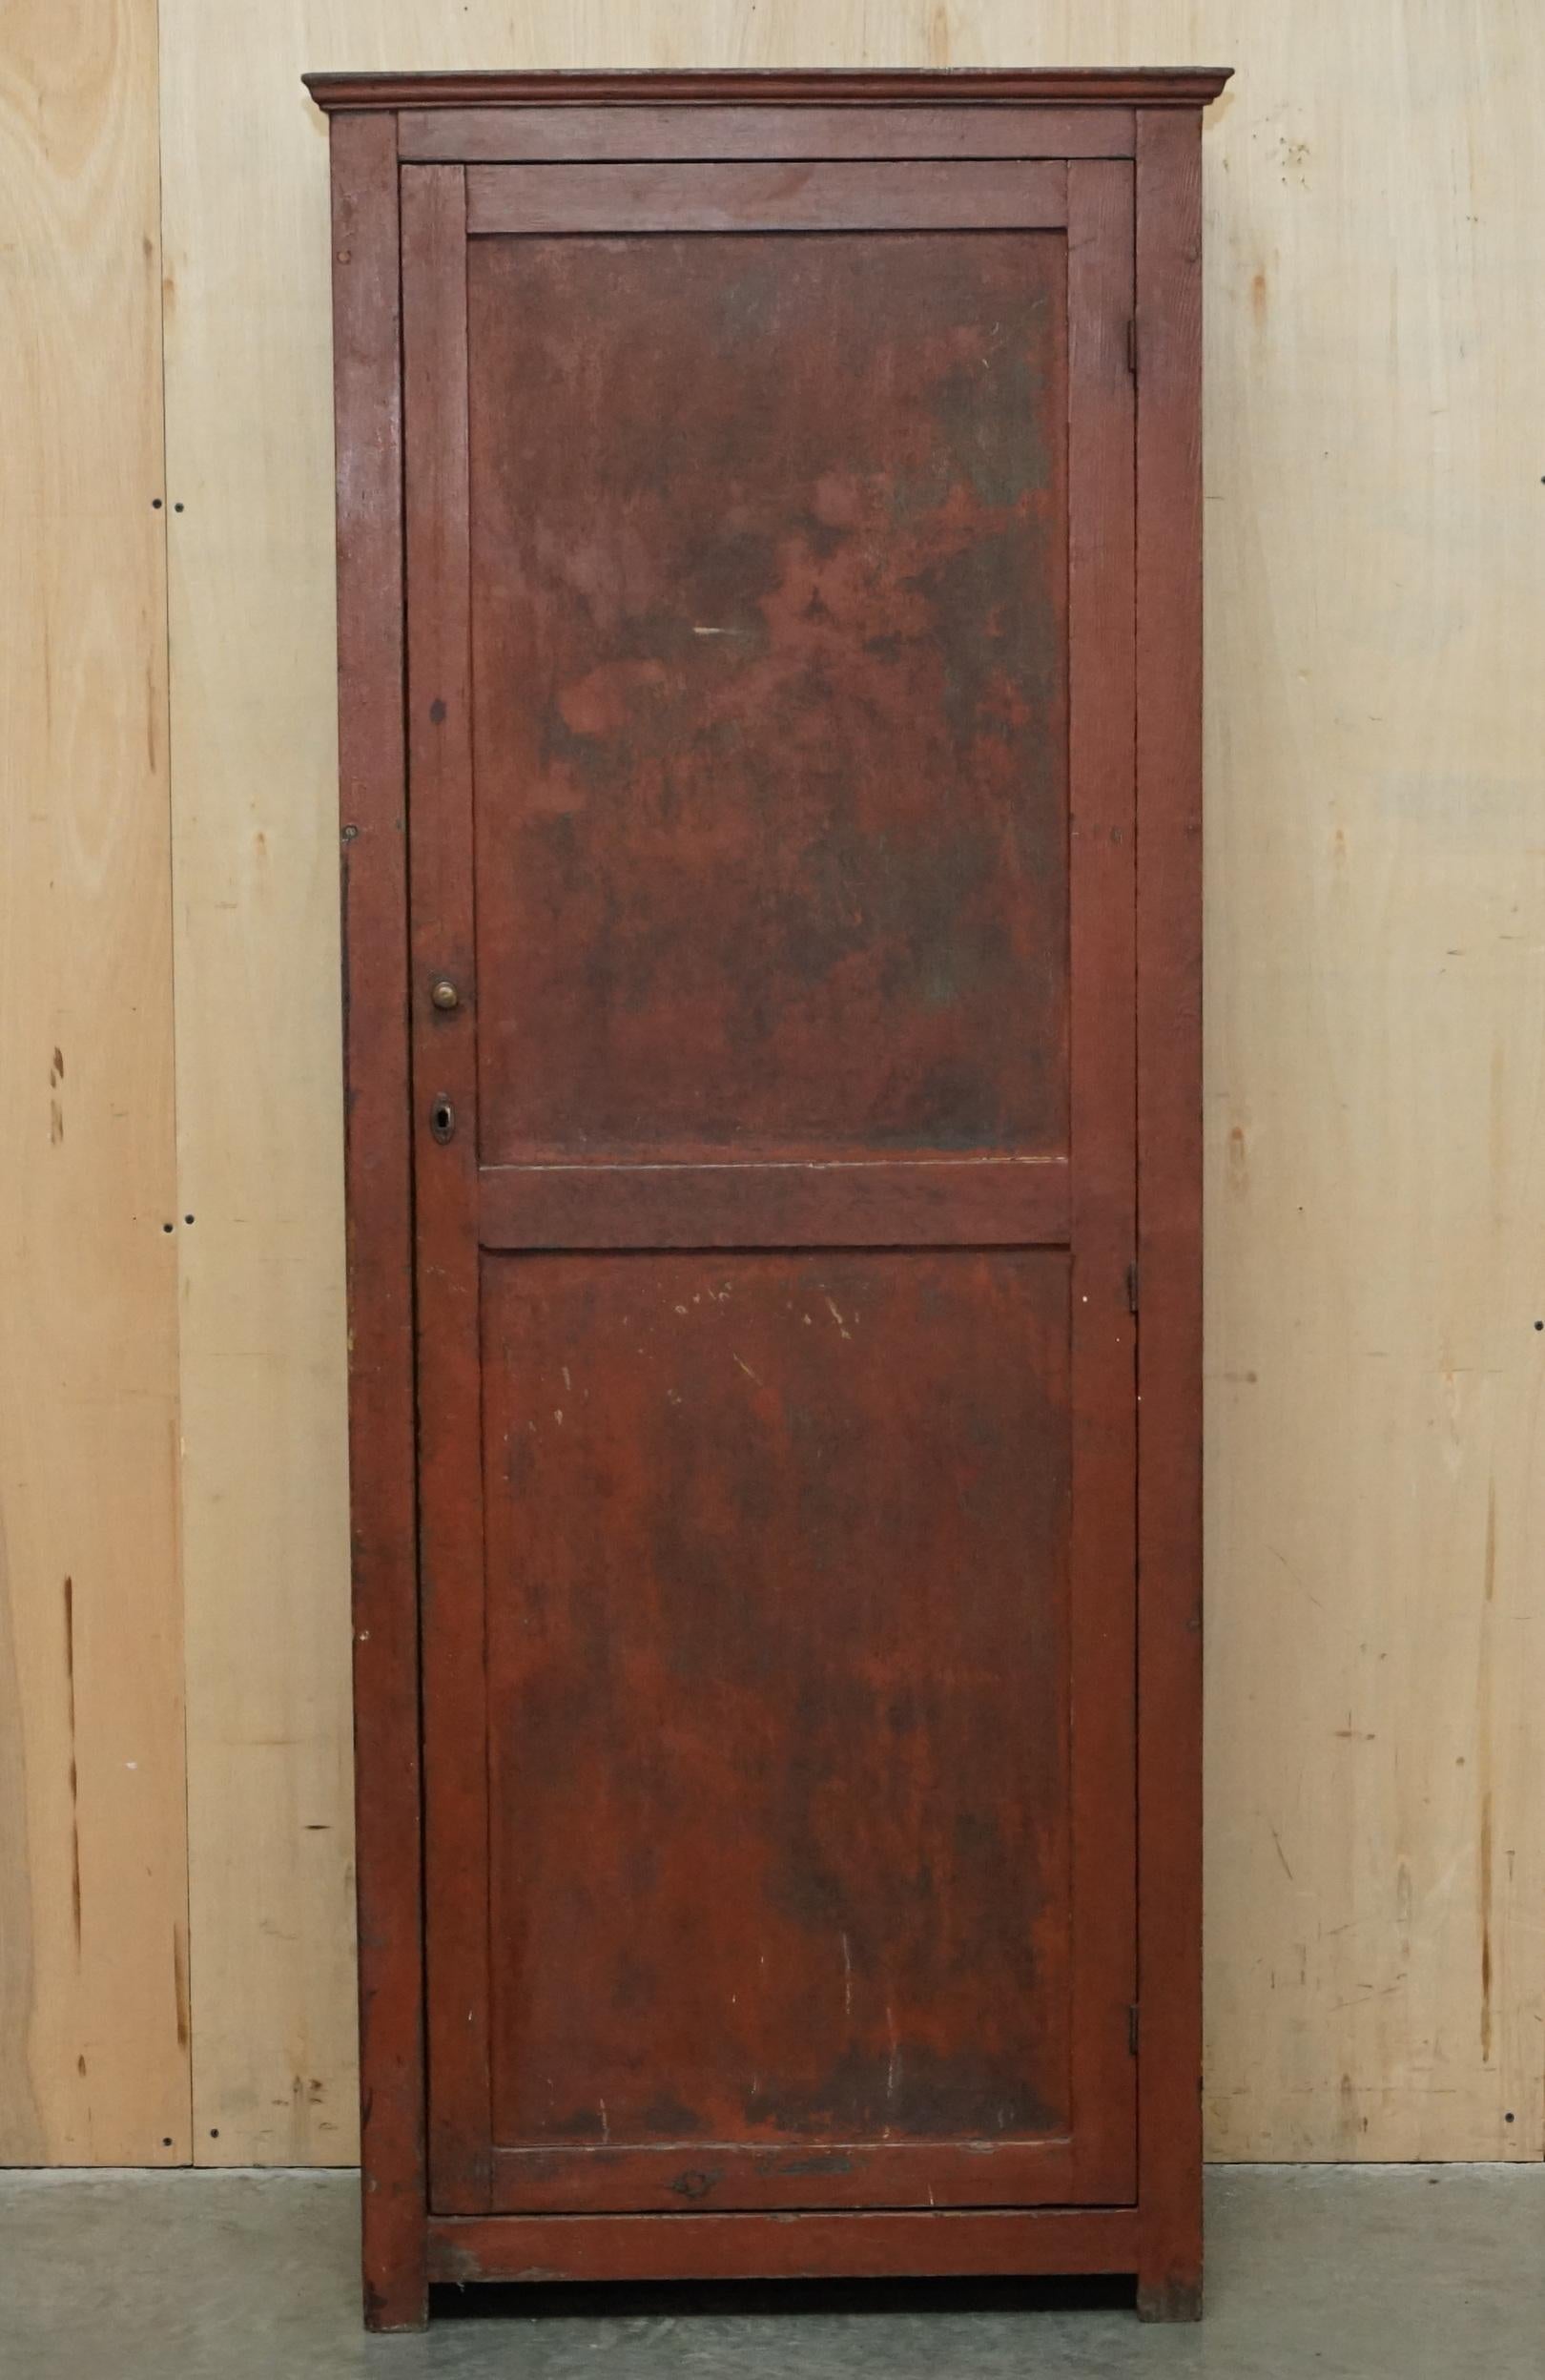 Royal House Antiques

Royal House Antiques is delighted to offer for sale this lovely original circa 1900 Andy's tool cupboard with period distressed paint

Please note the delivery fee listed is just a guide, it covers within the M25 only for the